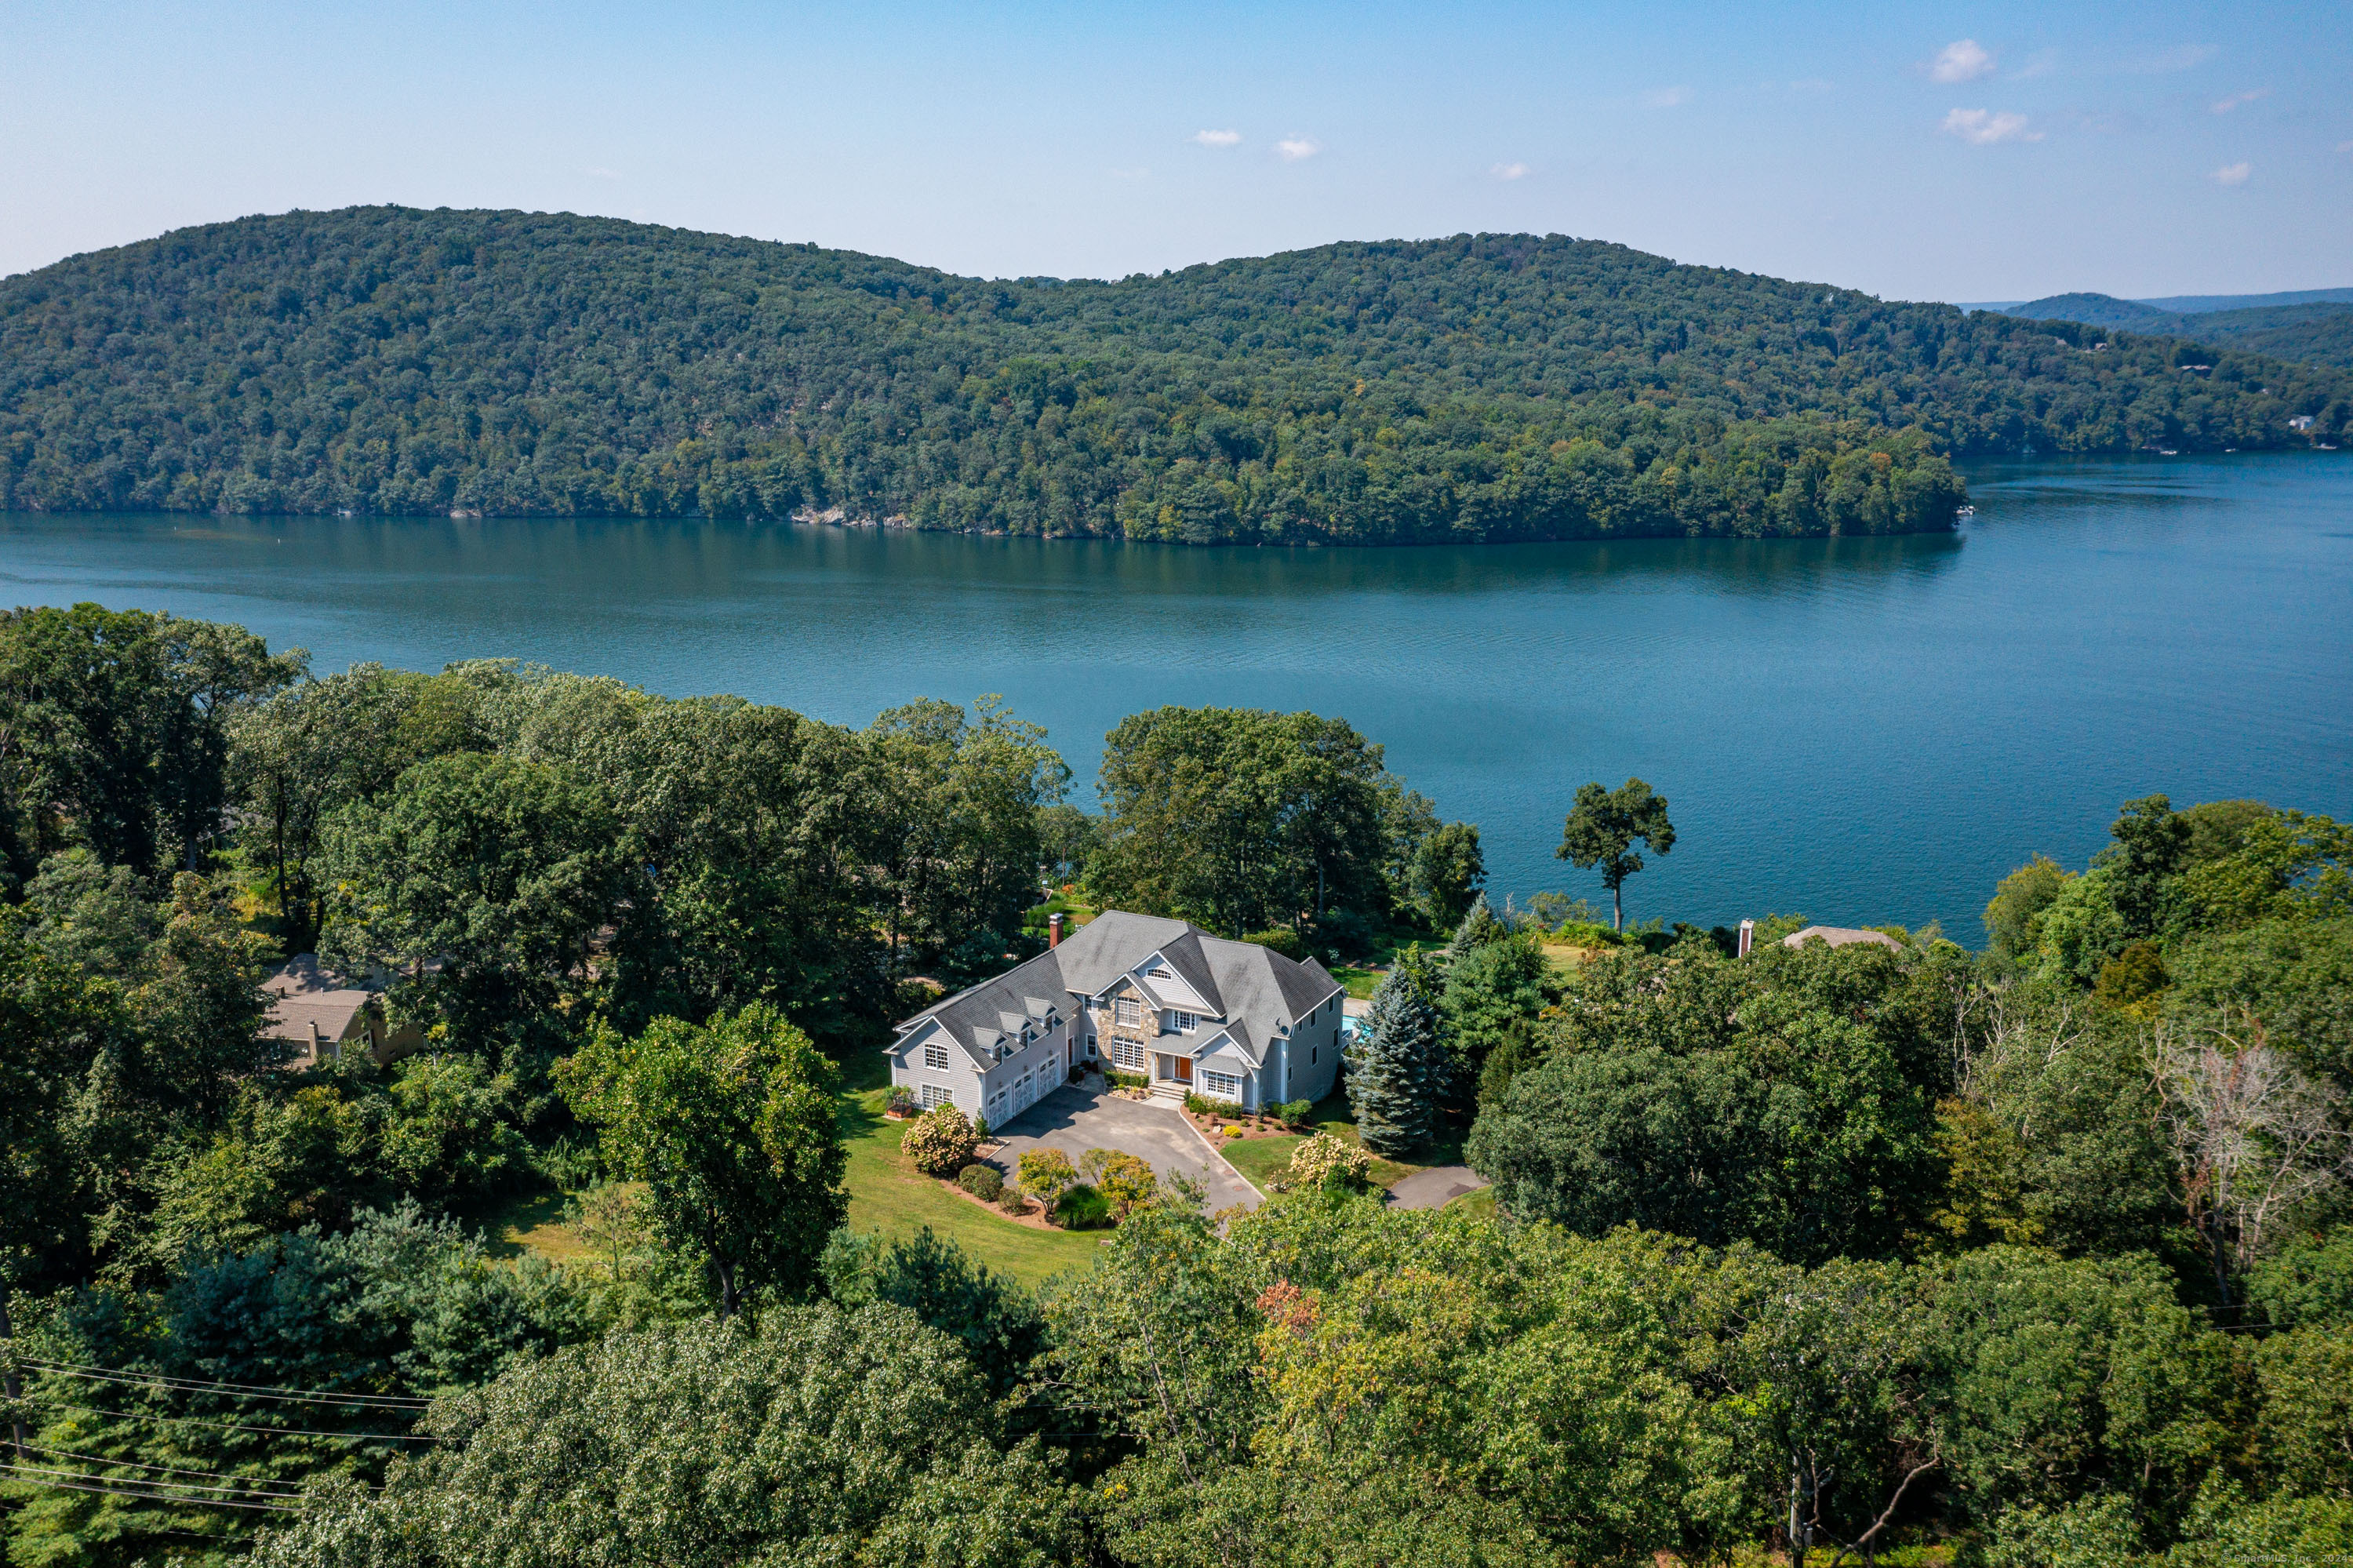 Candlewood Lake direct waterfront oasis complete with west exposure lake views, private boat dock, heated 20X40 in-ground gunite swimming pool with spa and outdoor cooking. The epitome of sophisticated elegance and casual lakefront living at its best! The spectacular views offer the most beautiful backdrop thru walls of windows and glass doors throughout the home. With over 8,900 sf of living space, this 4 bedroom, 4 full and 2 half bath home features an open concept floor plan on the main level, hardwood floors throughout, and plenty of space to entertain family and friends, both inside and out. Beautifully sited on 1.34 acres, the private setting includes breathtaking views of Candlewood Lake, professionally landscaped property, outdoor shower, stone walls and stairs to the private dock where you can enjoy the day at the lake sunbathing, boating, kayaking, paddle boarding, swimming and fishing. A few of the many benefits of this property: it is not a part of an association or tax district, there are no speed bumps, and it's minutes from all of Danbury's conveniences, yet you feel miles away from everything while enjoying lakefront living. Privacy, peace and tranquility abound at this west facing home with over 200+' of direct water frontage. The main level features a spacious two story entry foyer with hardwood floors and walnut inlay, a grand dining room with French doors, and formal living room with access to the deck. The gourmet kitchen has propane cooking, wall ovens